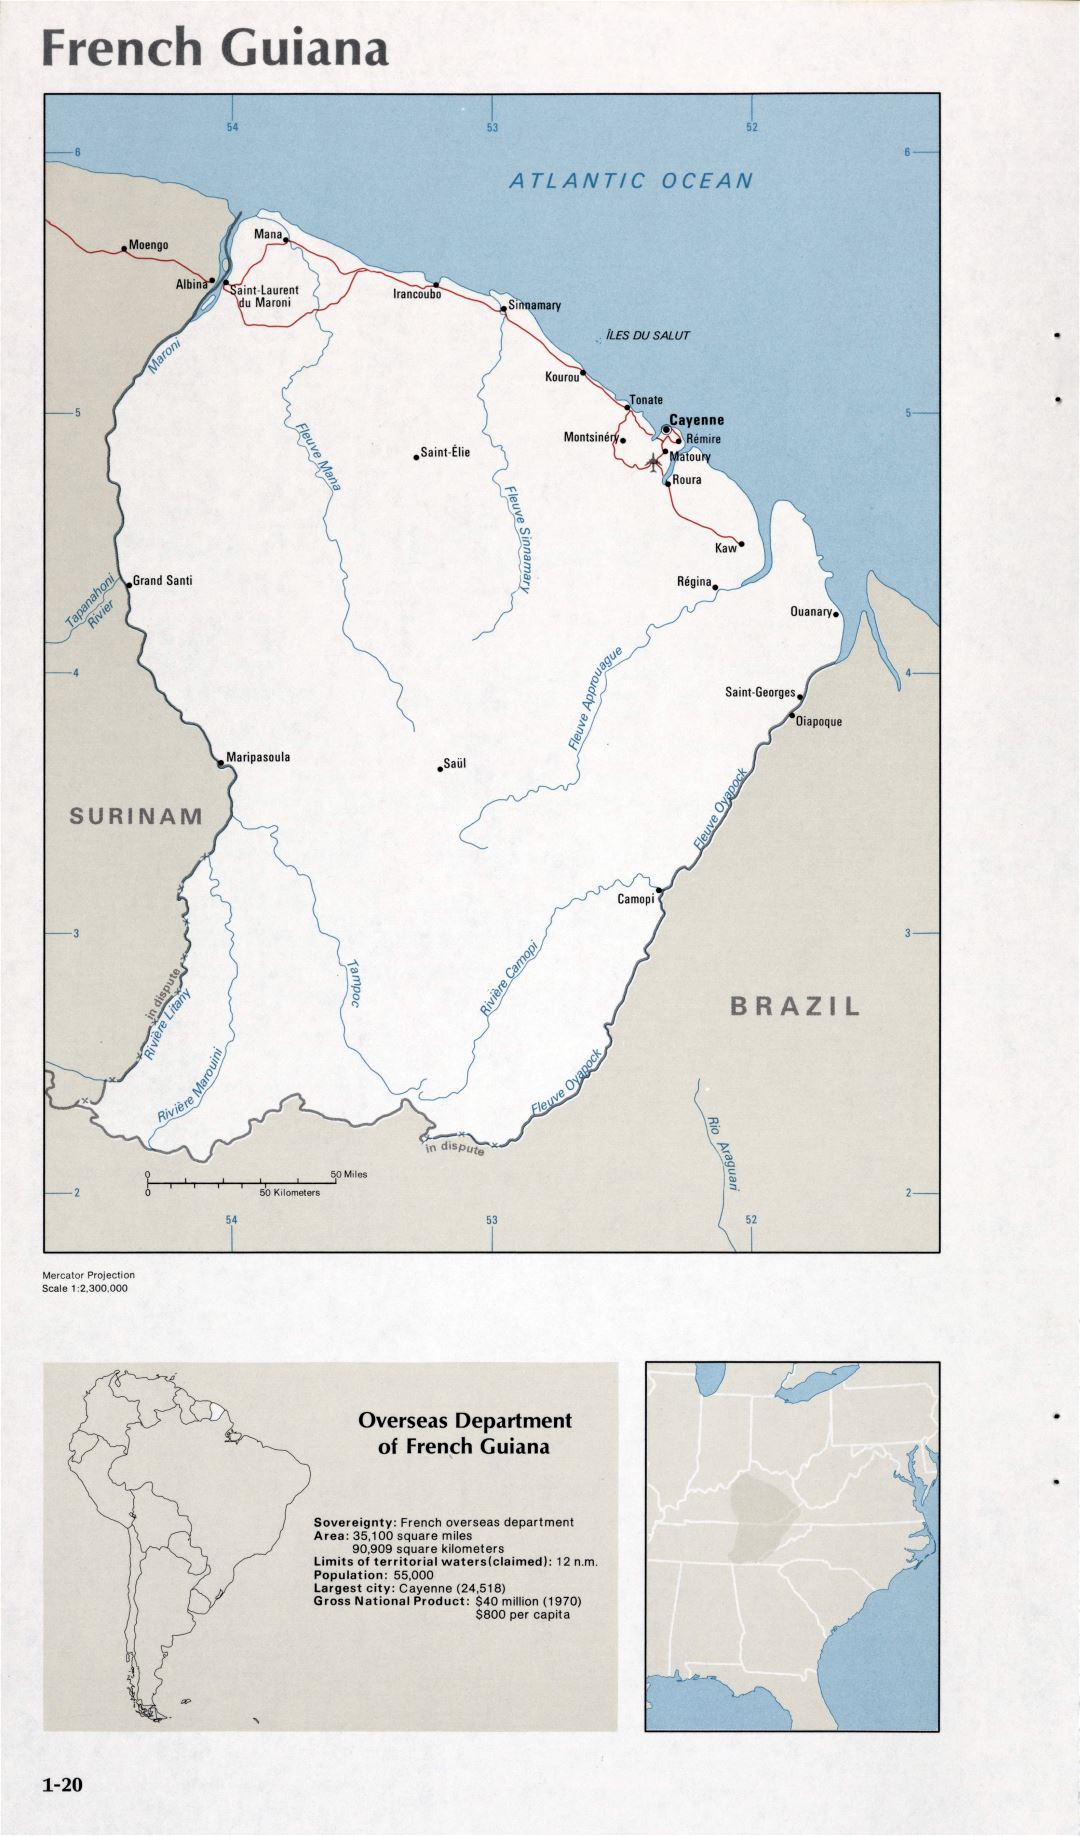 Map of French Guiana (1-20)